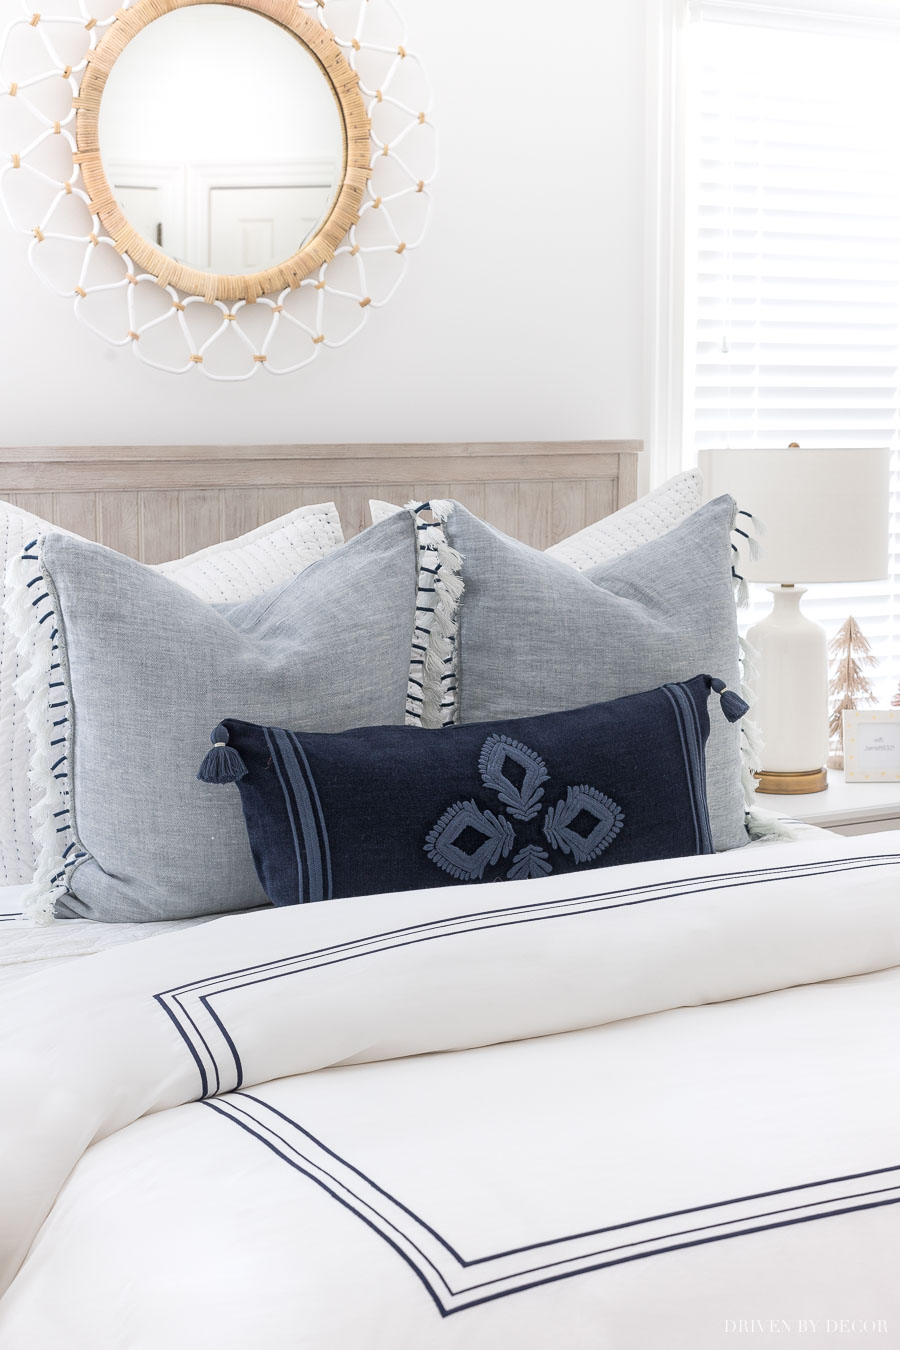 Blue & White Bedding & 7 Tips for the Perfectly Layered Bed